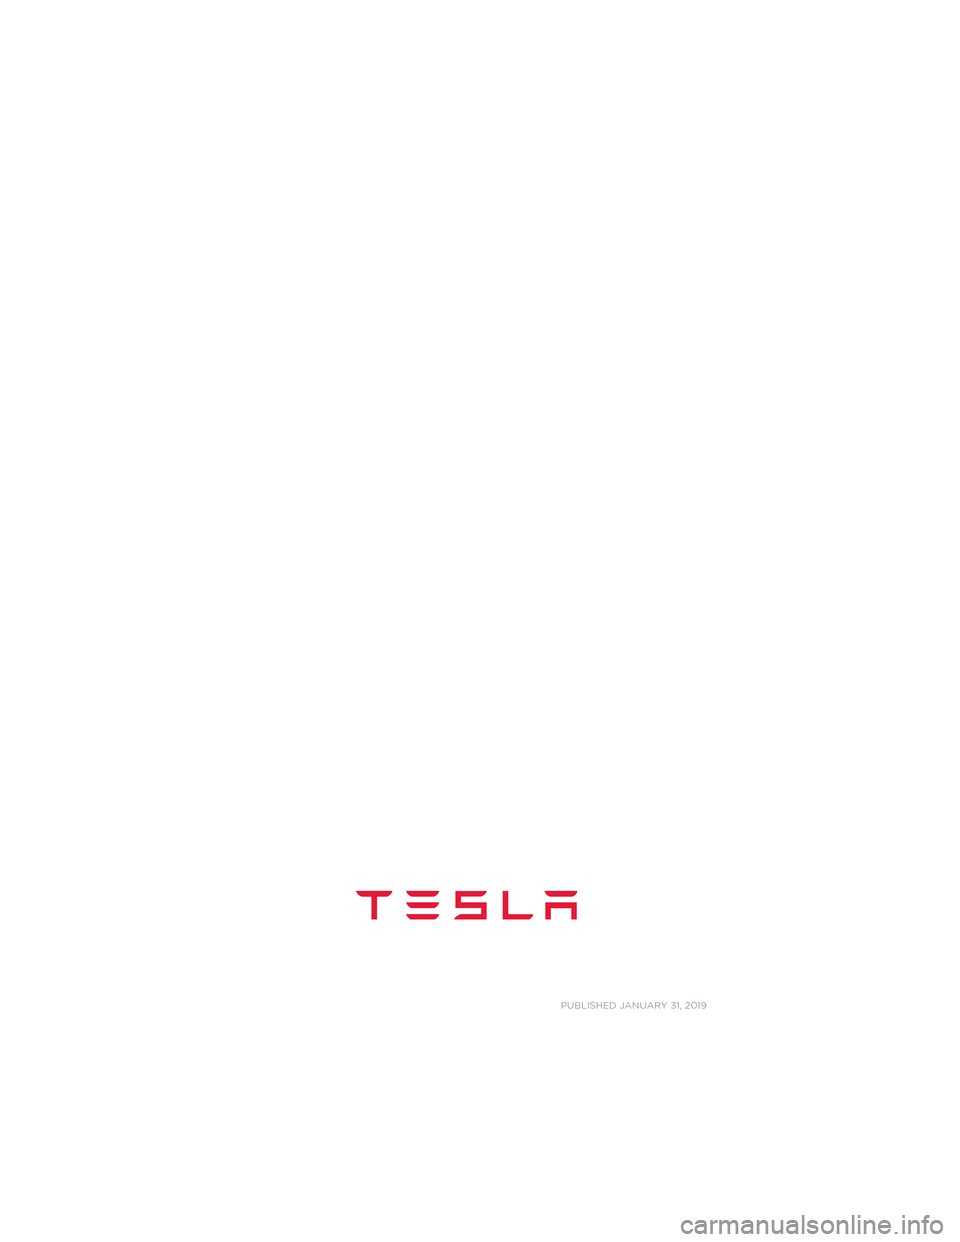 TESLA MODEL 3 2019  Handleiding (in Dutch) PUBLISHED JANUARY 31, 2019
Model S Quick Guide - NA Rev C.book  Page
 2  Wednesday, December 18, 2013  12:40 PM 